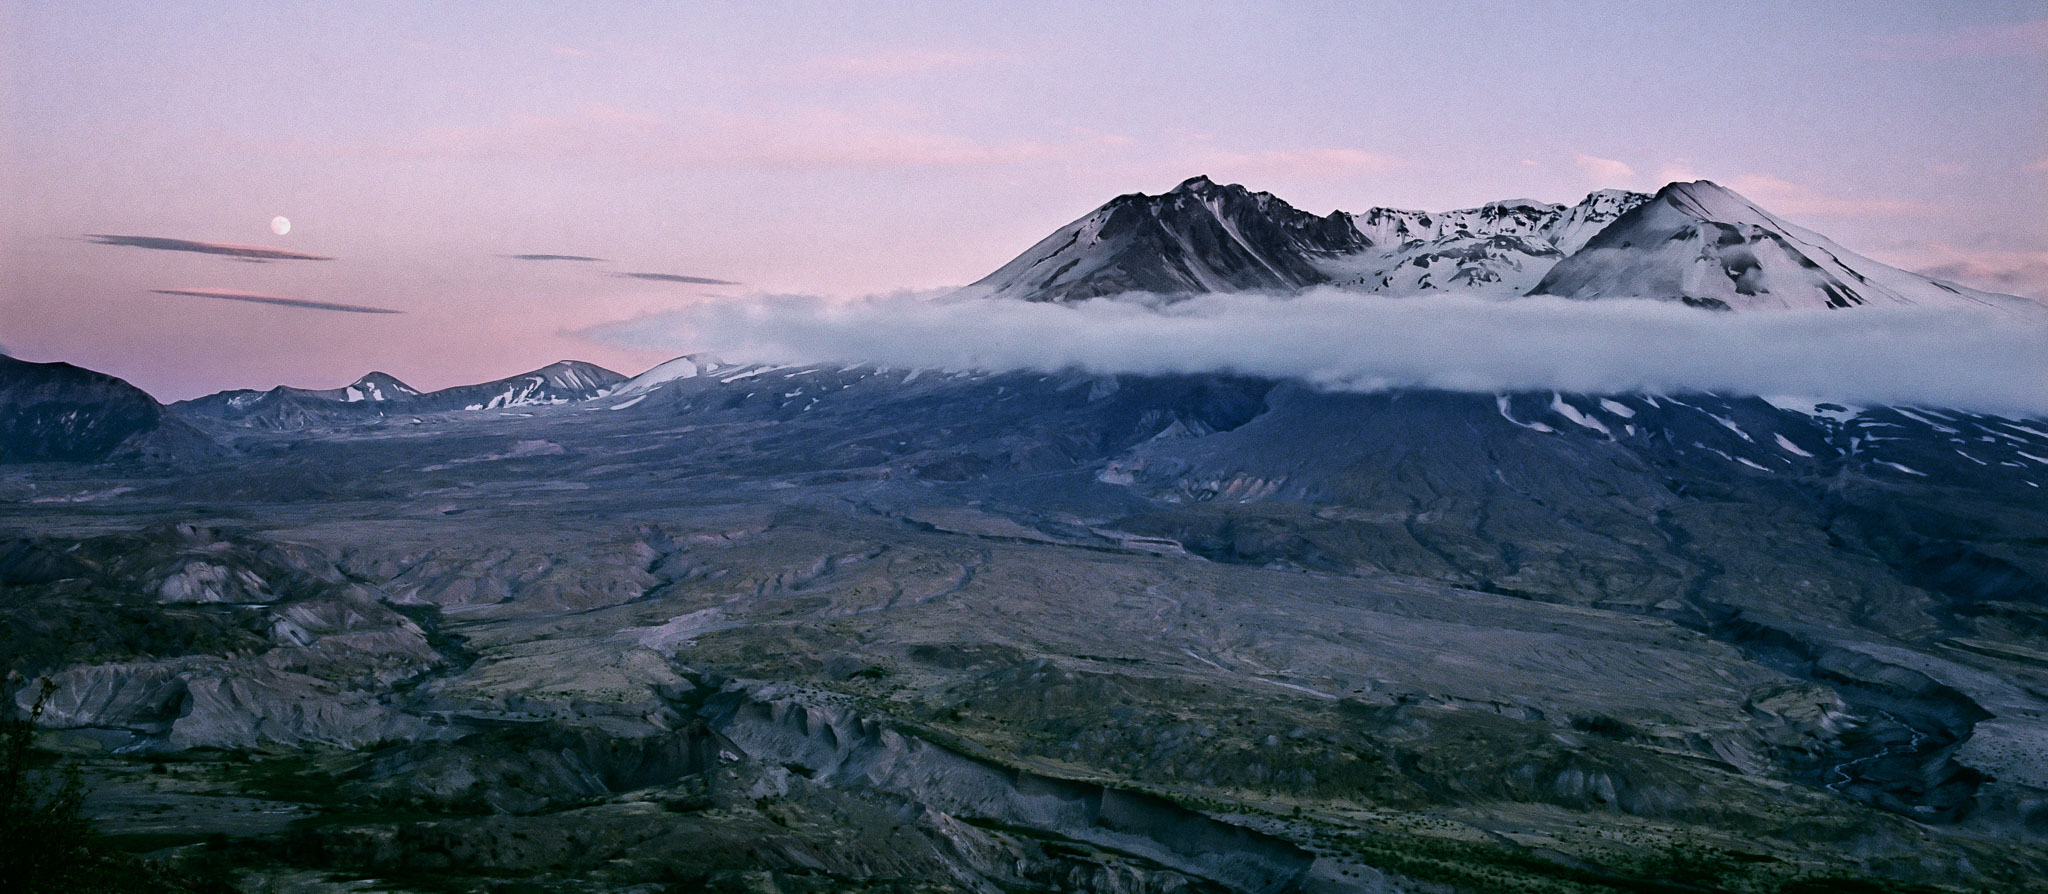 mt-st-helens-from-the-north-mt-st-helens-national-volcanic-area-wa-8x19tif.jpg